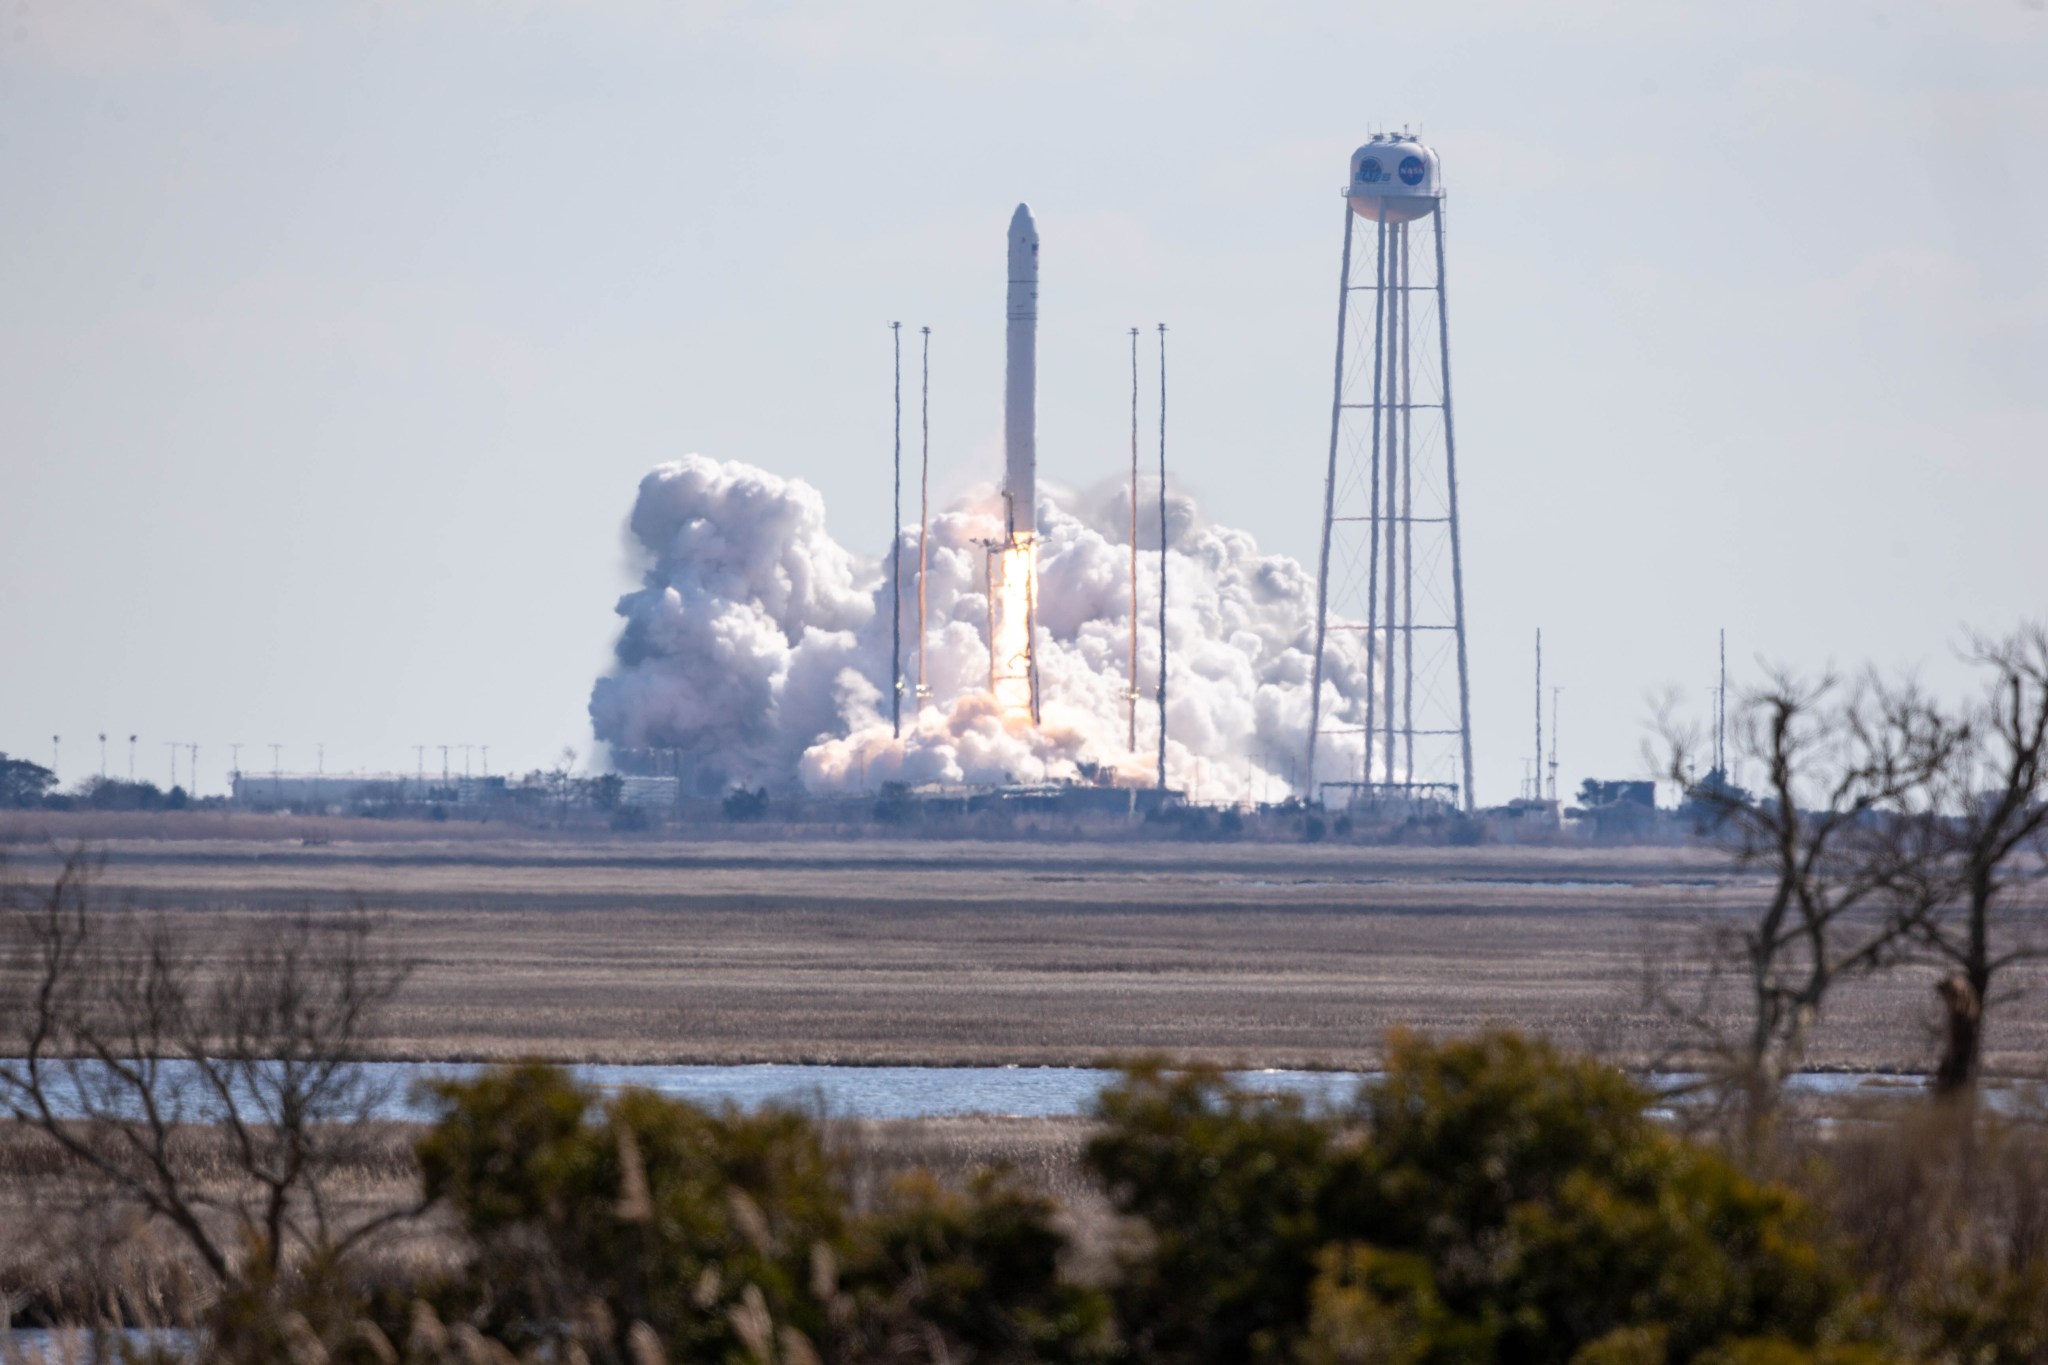 The Northrop Grumman Antares rocket, with Cygnus resupply spacecraft aboard, launches from Pad-0A, Saturday, Feb. 20, 2021.